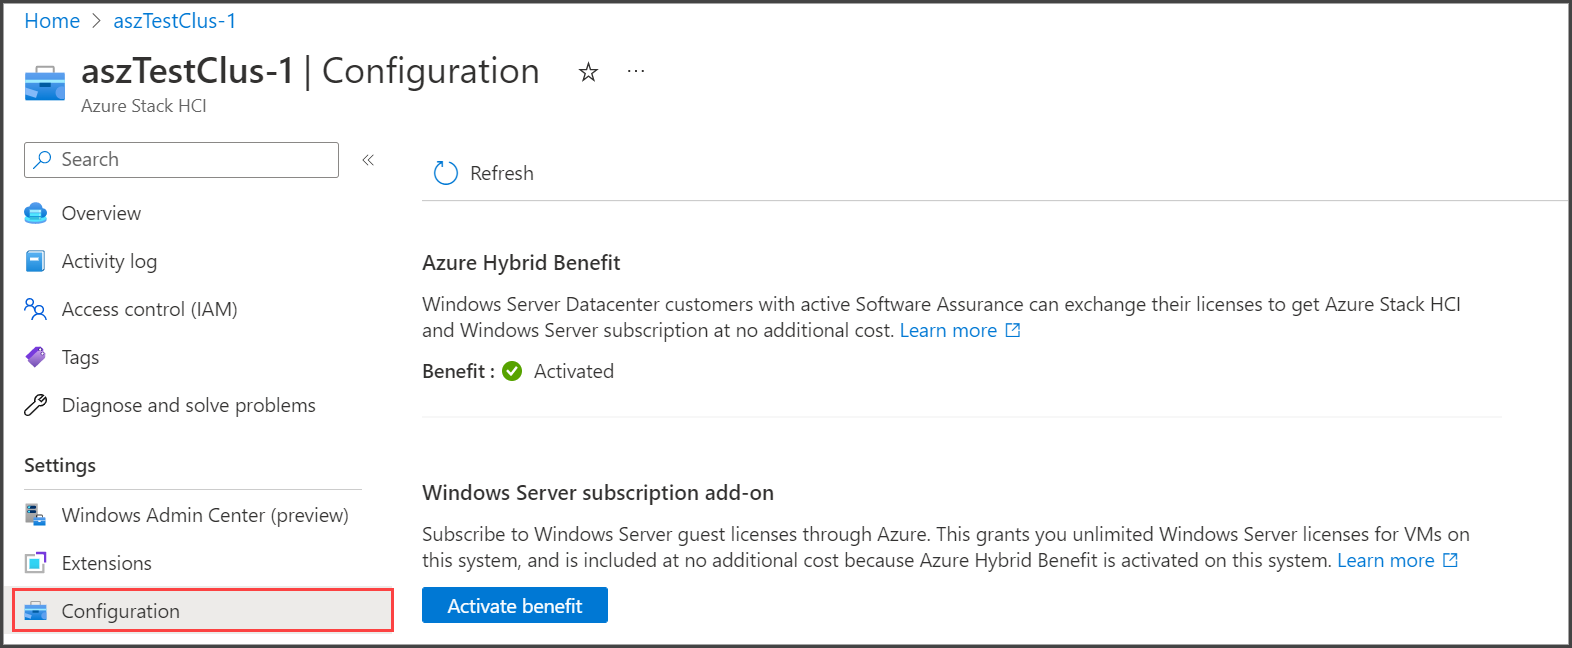 Screenshot of the screen for activating Azure Hybrid Benefit for Azure Stack HCI.